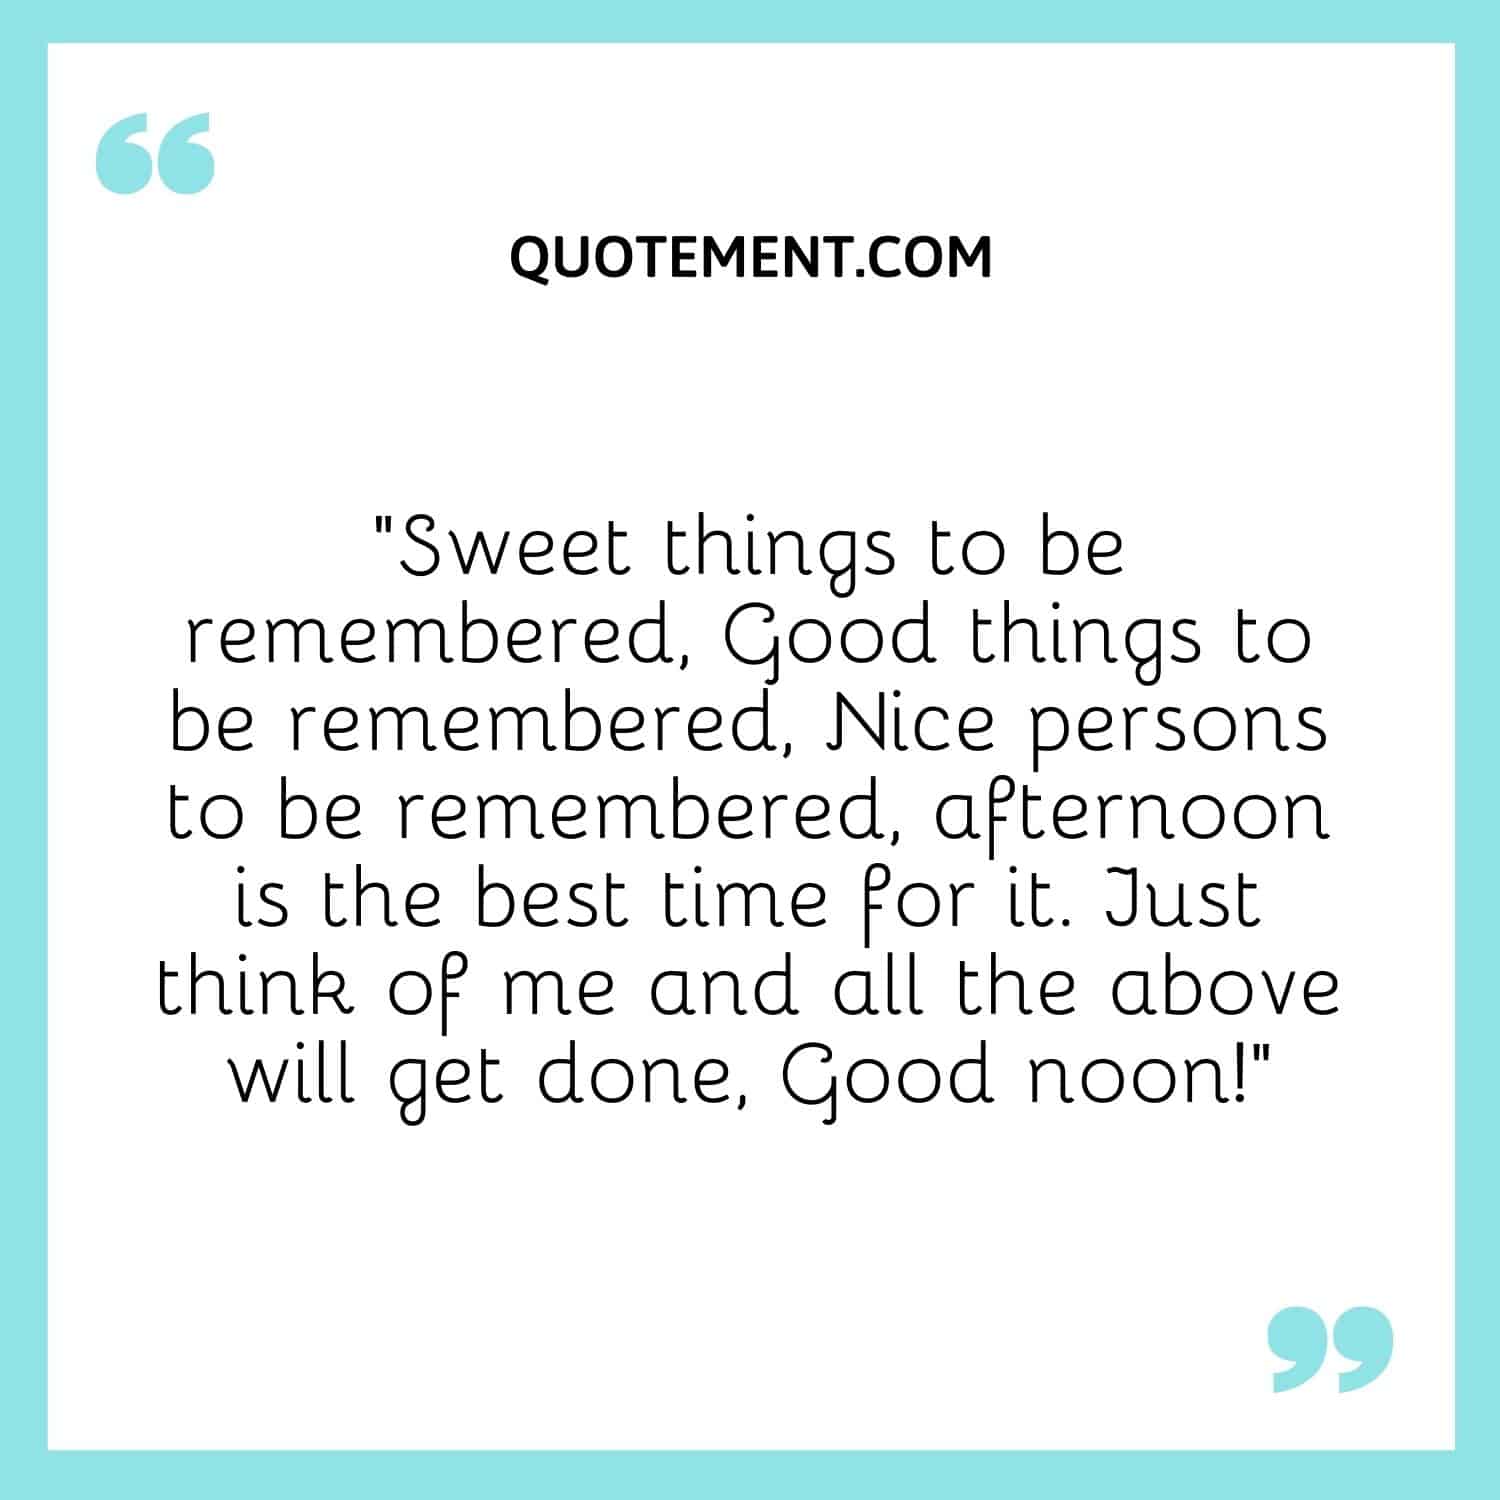 Sweet things to be remembered, Good things to be remembered,